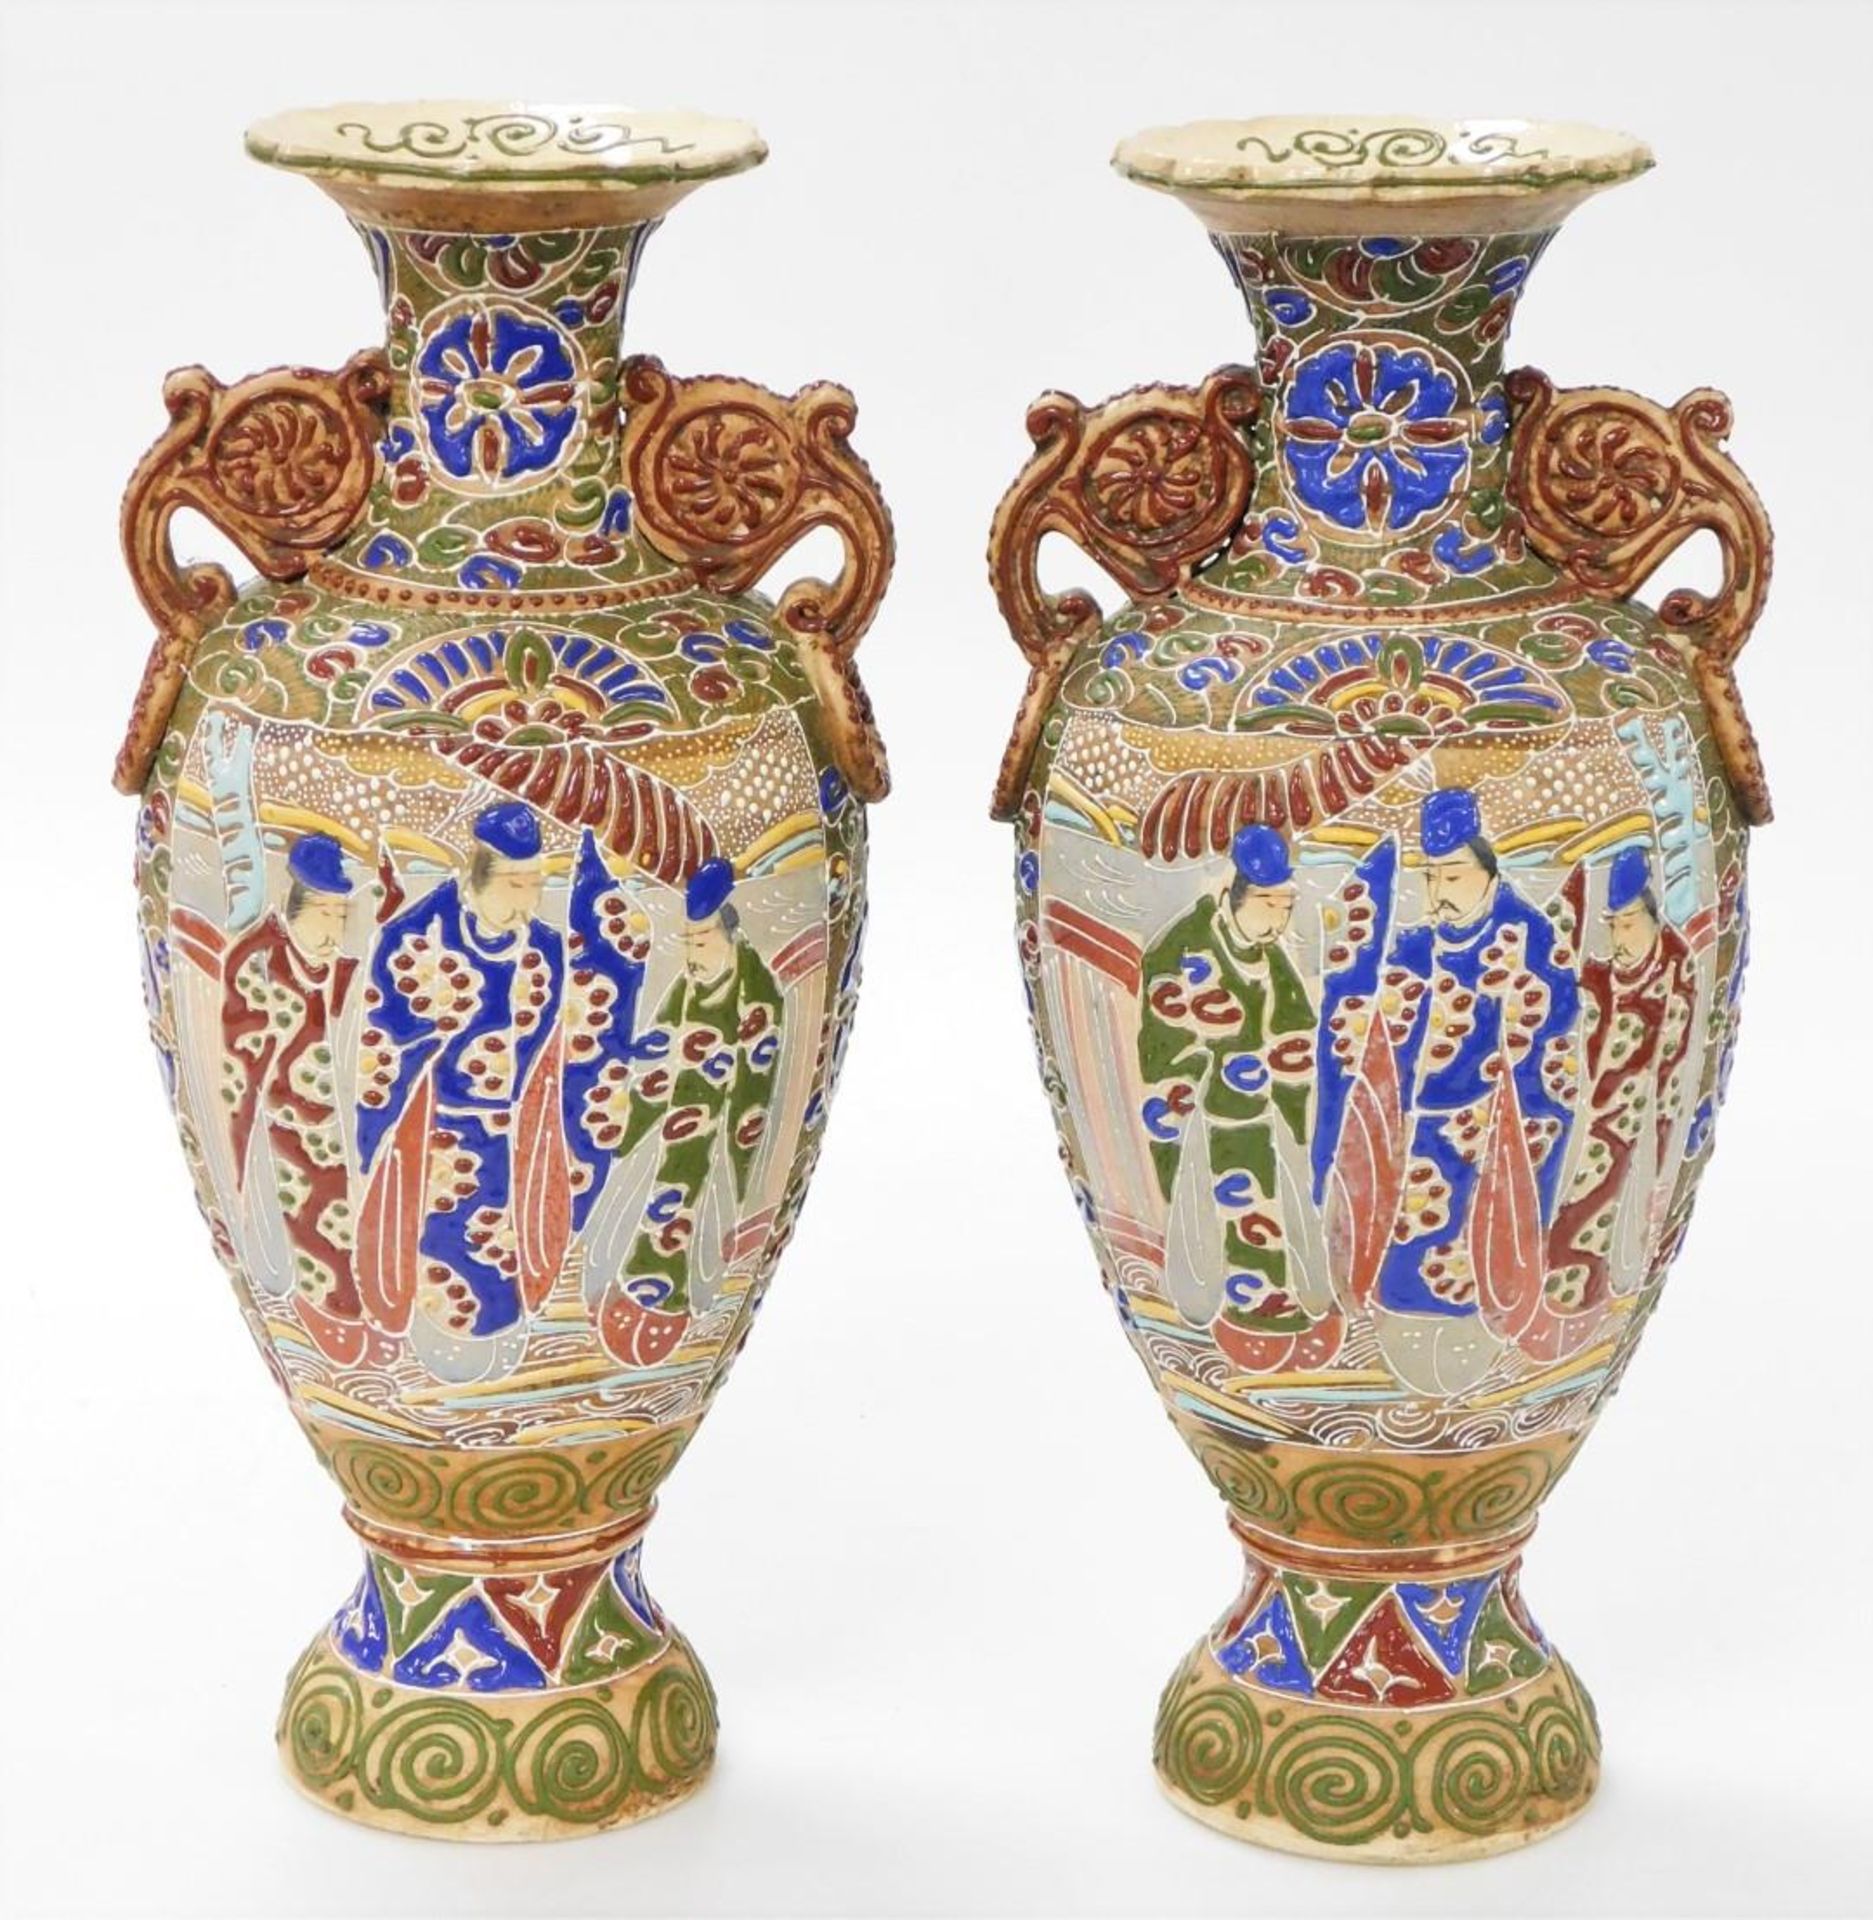 A pair of Meiji period Japanese Satsuma moriage vases, of twin handled baluster form, decorated with